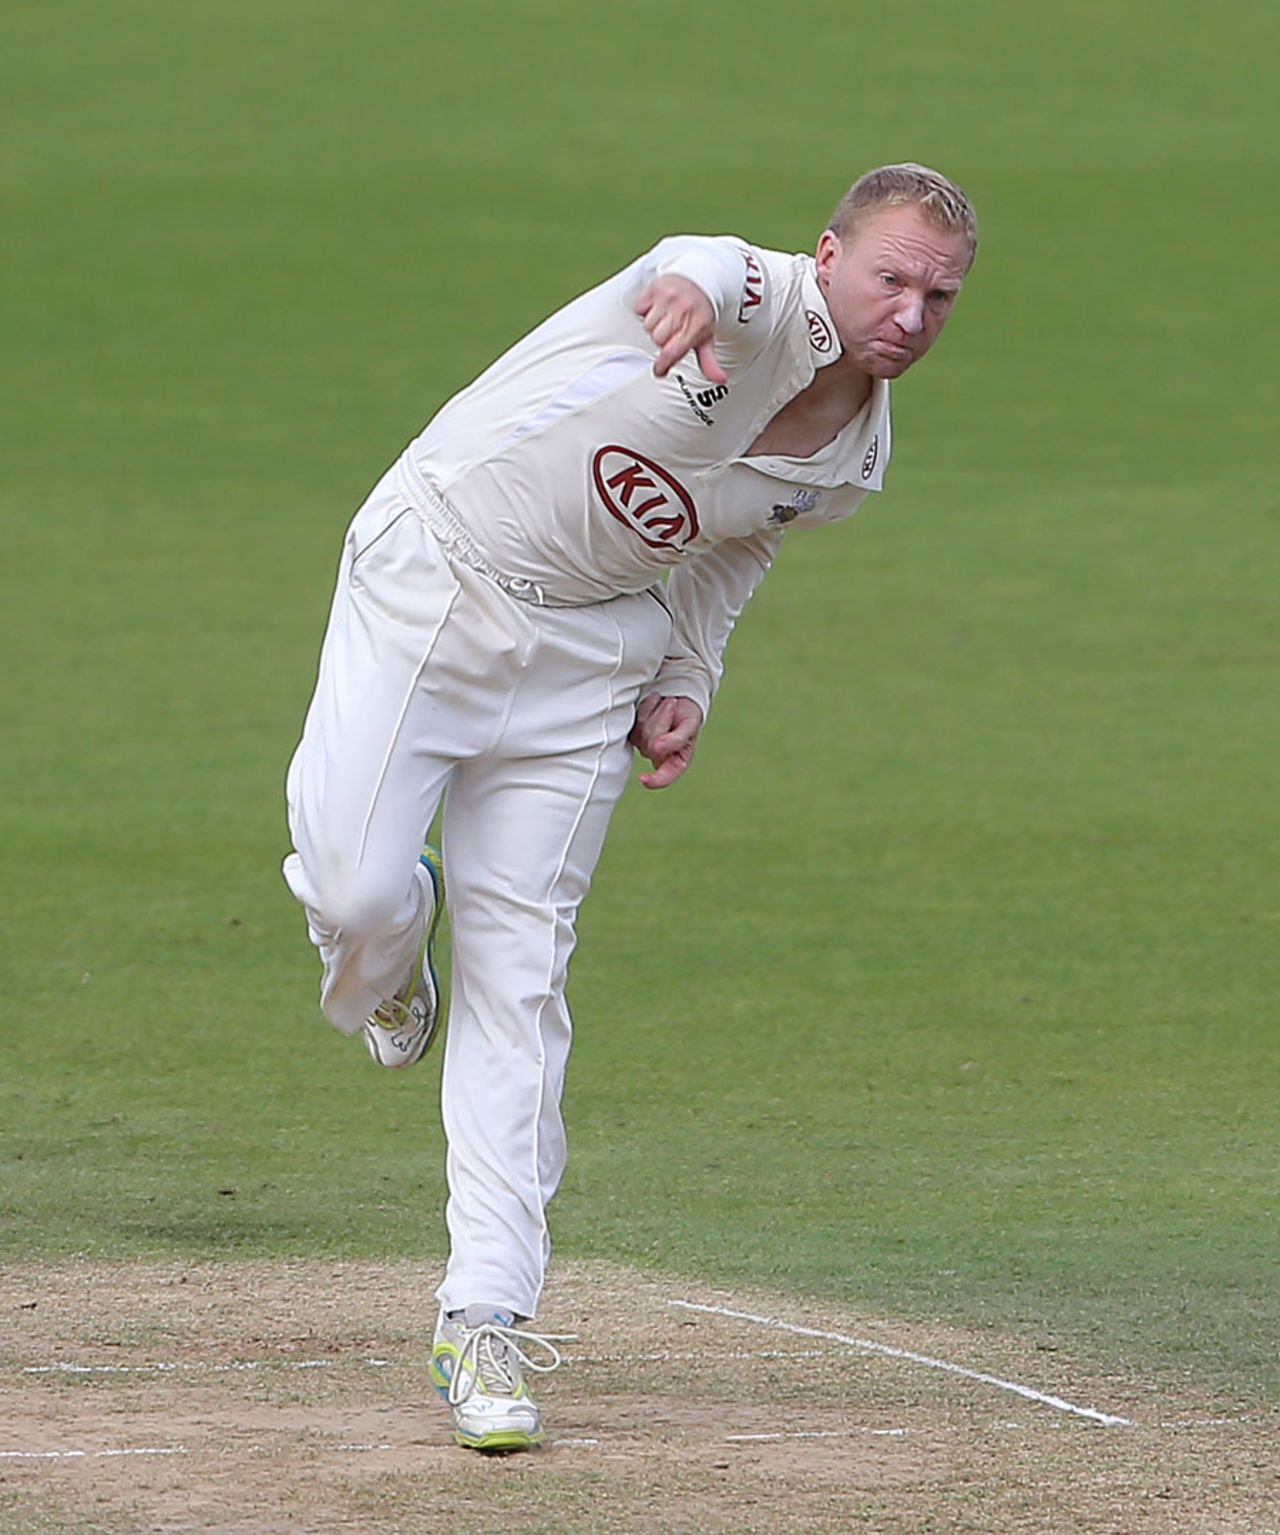 Gareth Batty in action, The Oval, August 29, 2013